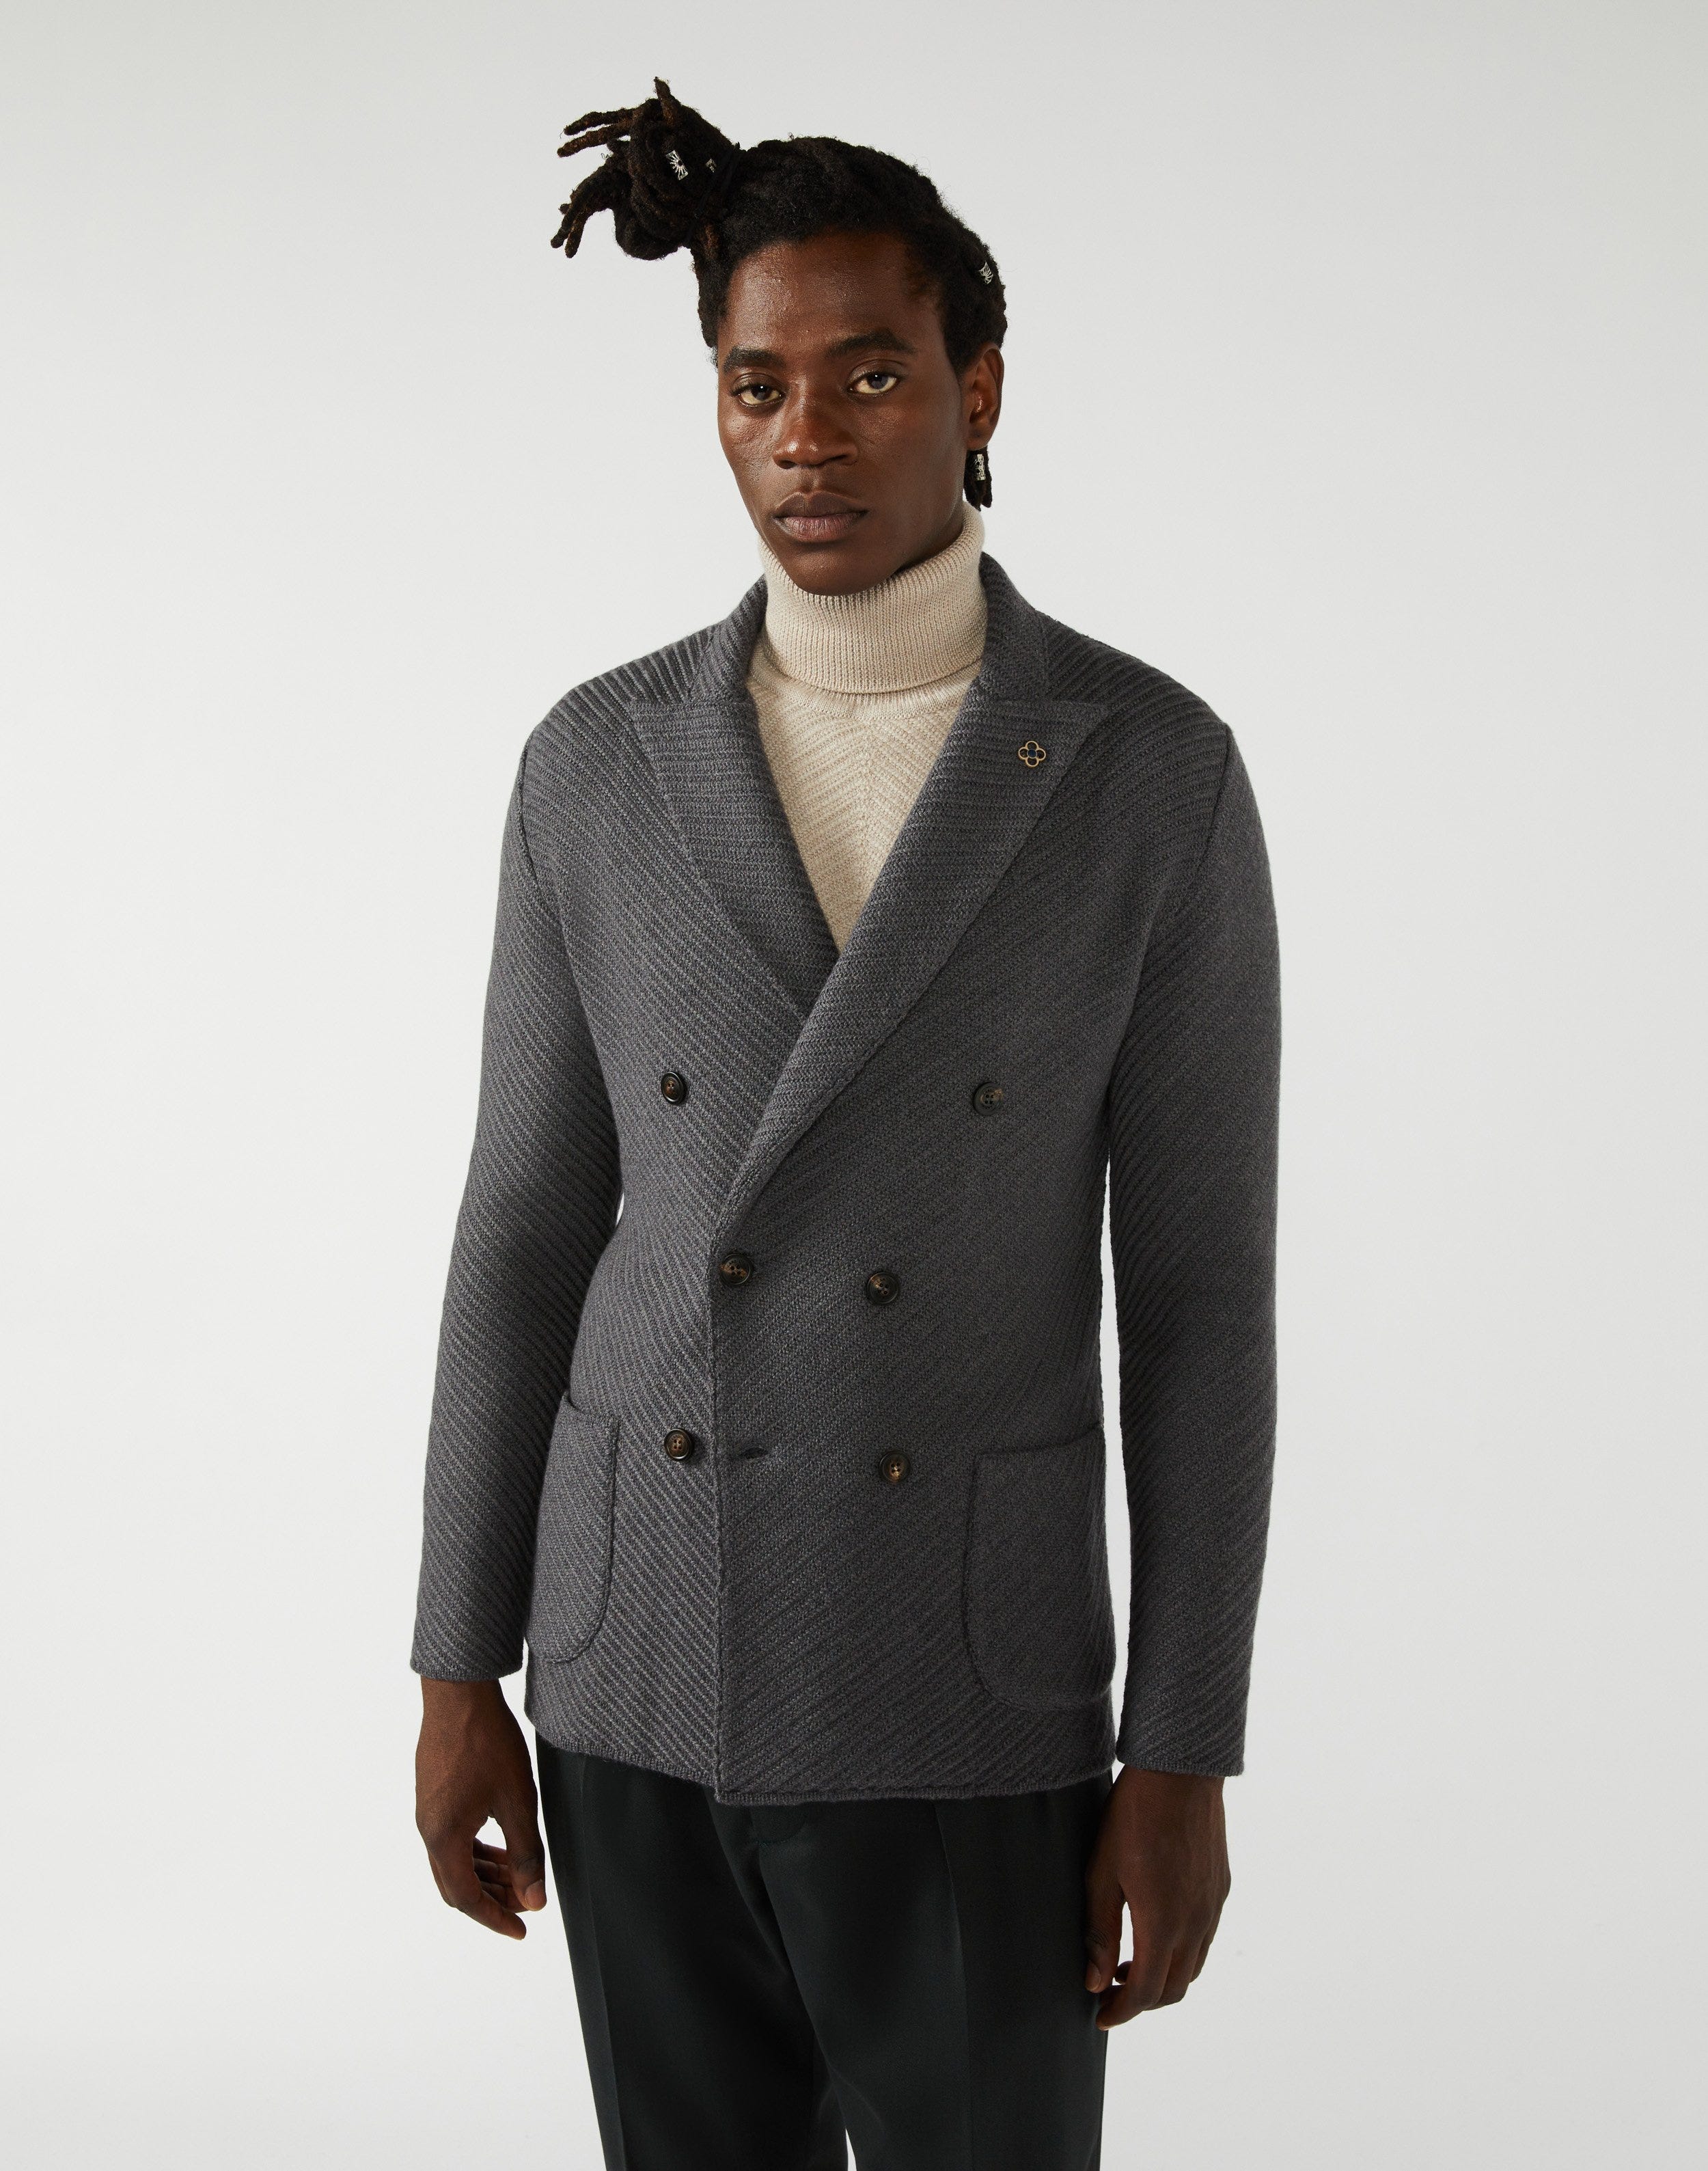 Grey double-breasted jacket in a jacquard knit